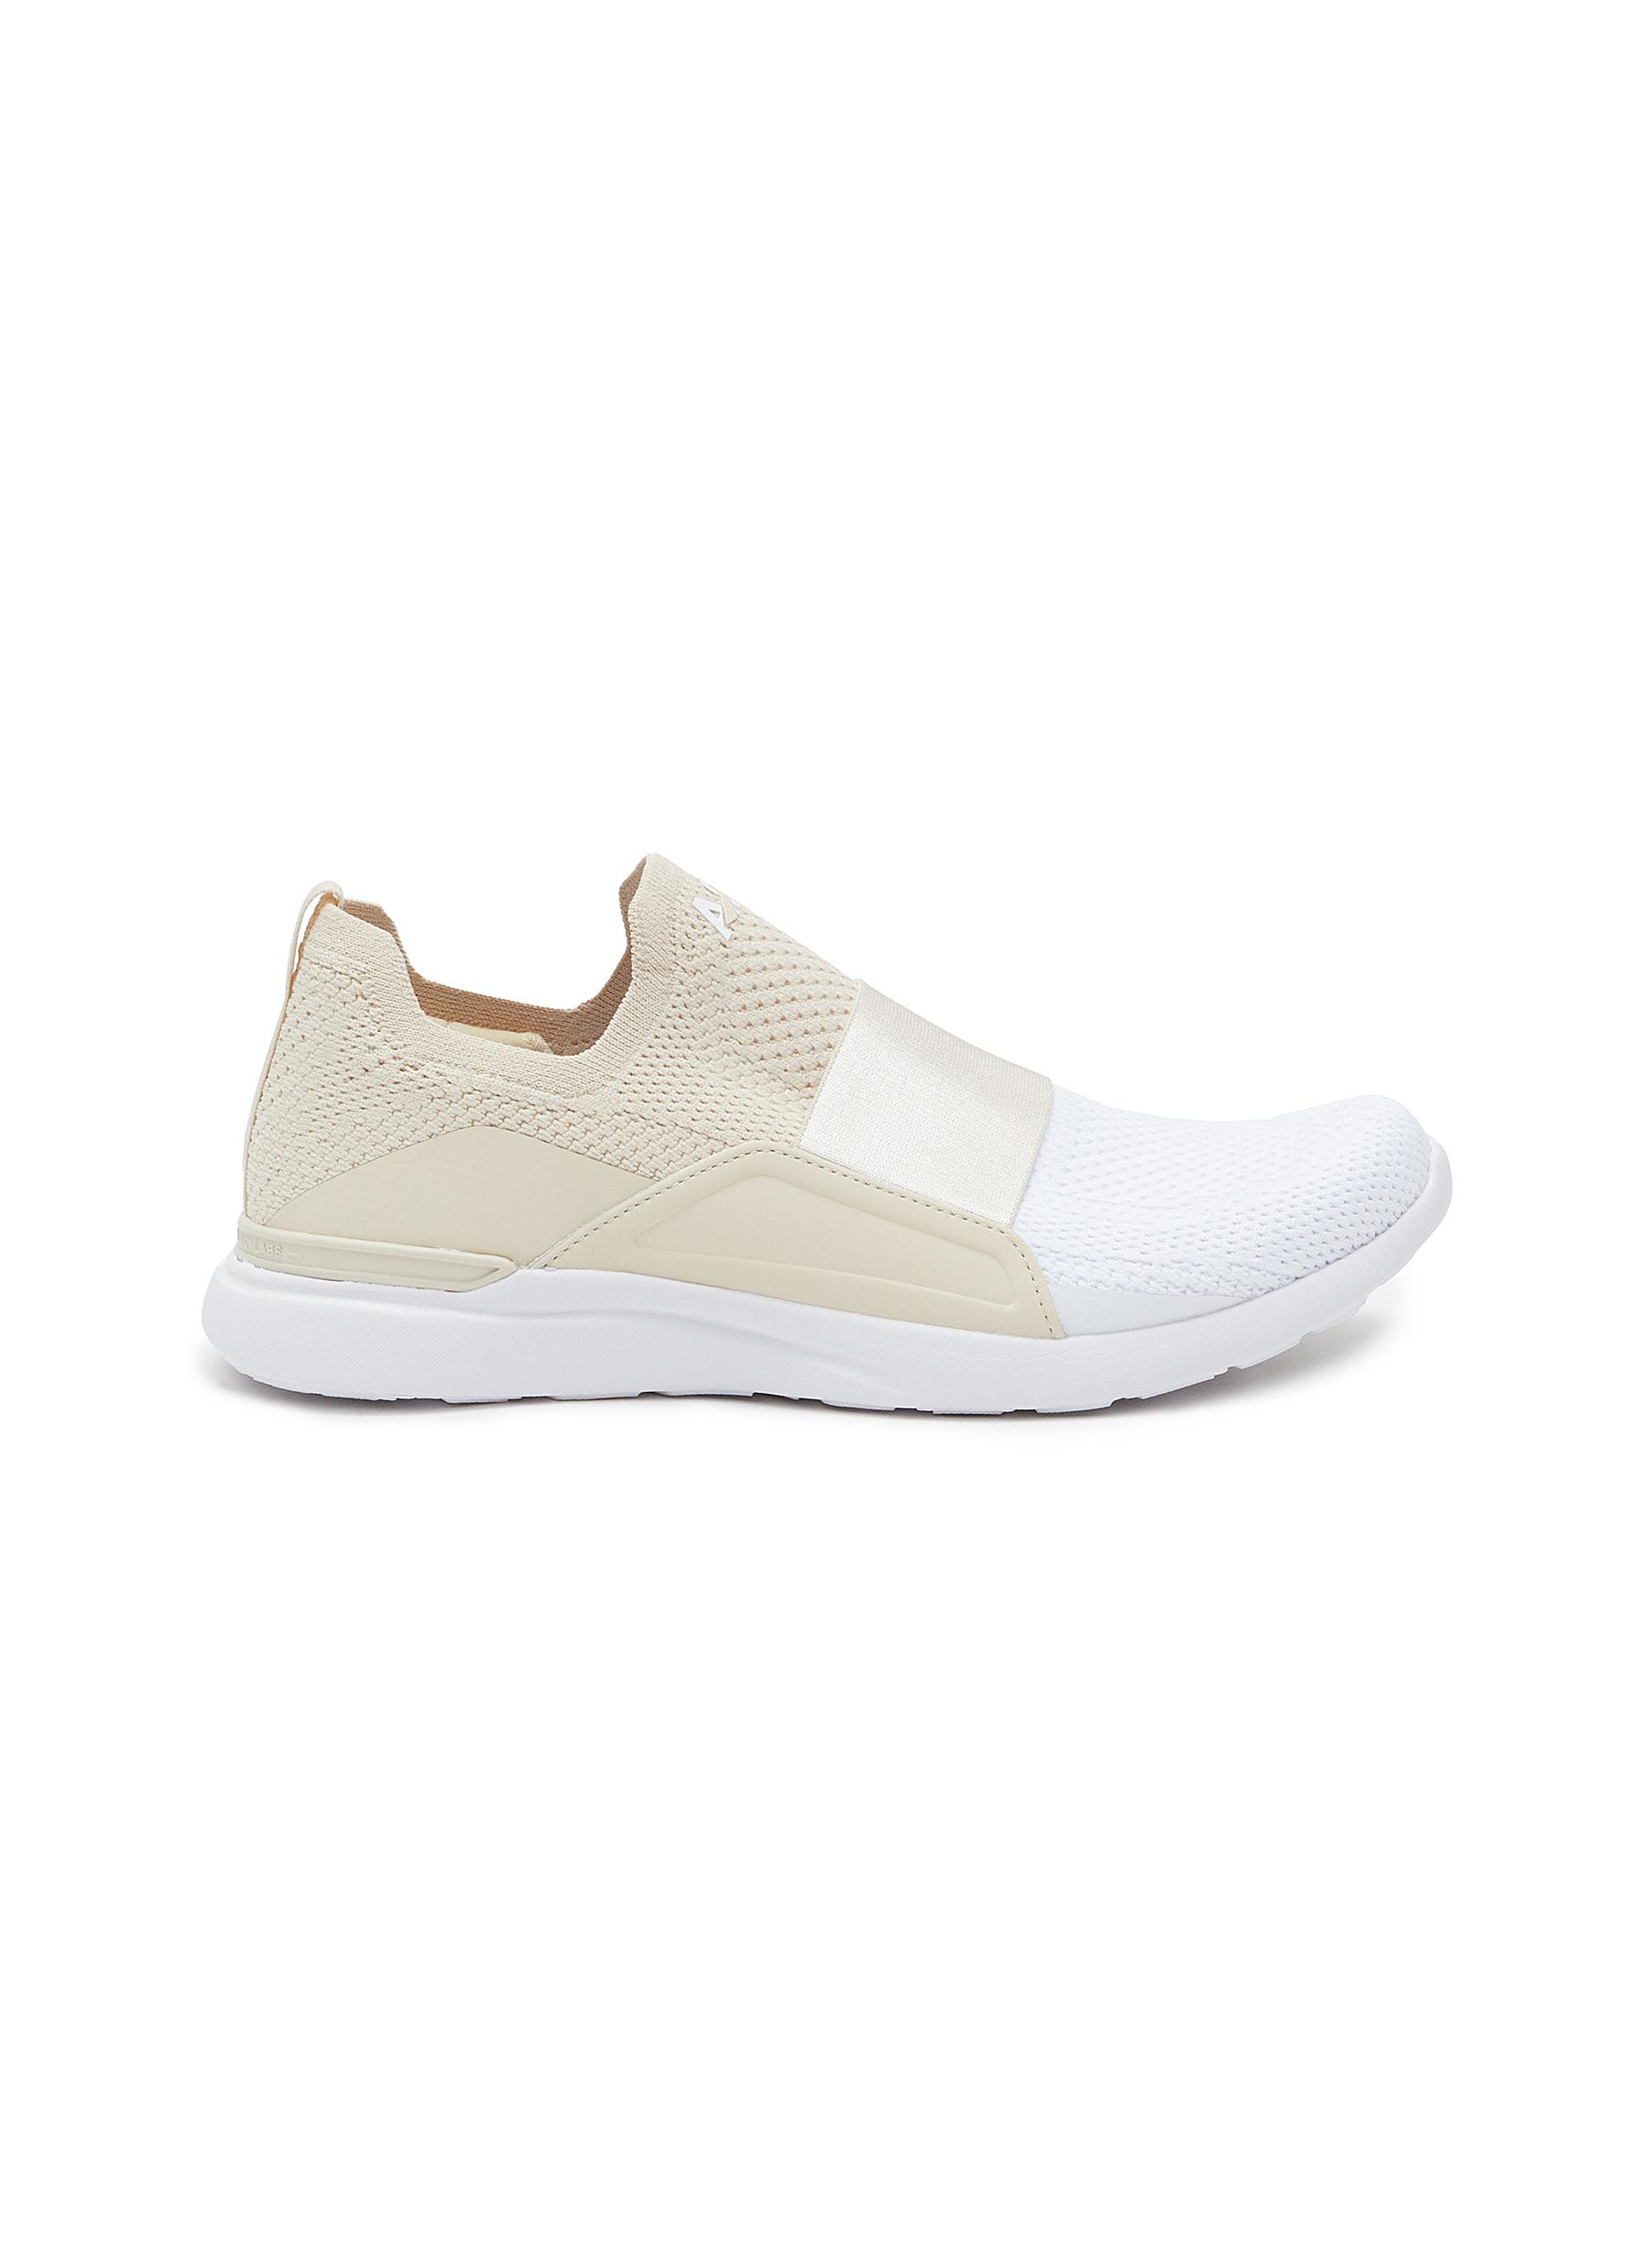 ATHLETIC PROPULSION LABS ‘TECHLOOM BLISS' LOW TOP SLIP ON BICOLOUR SNEAKERS